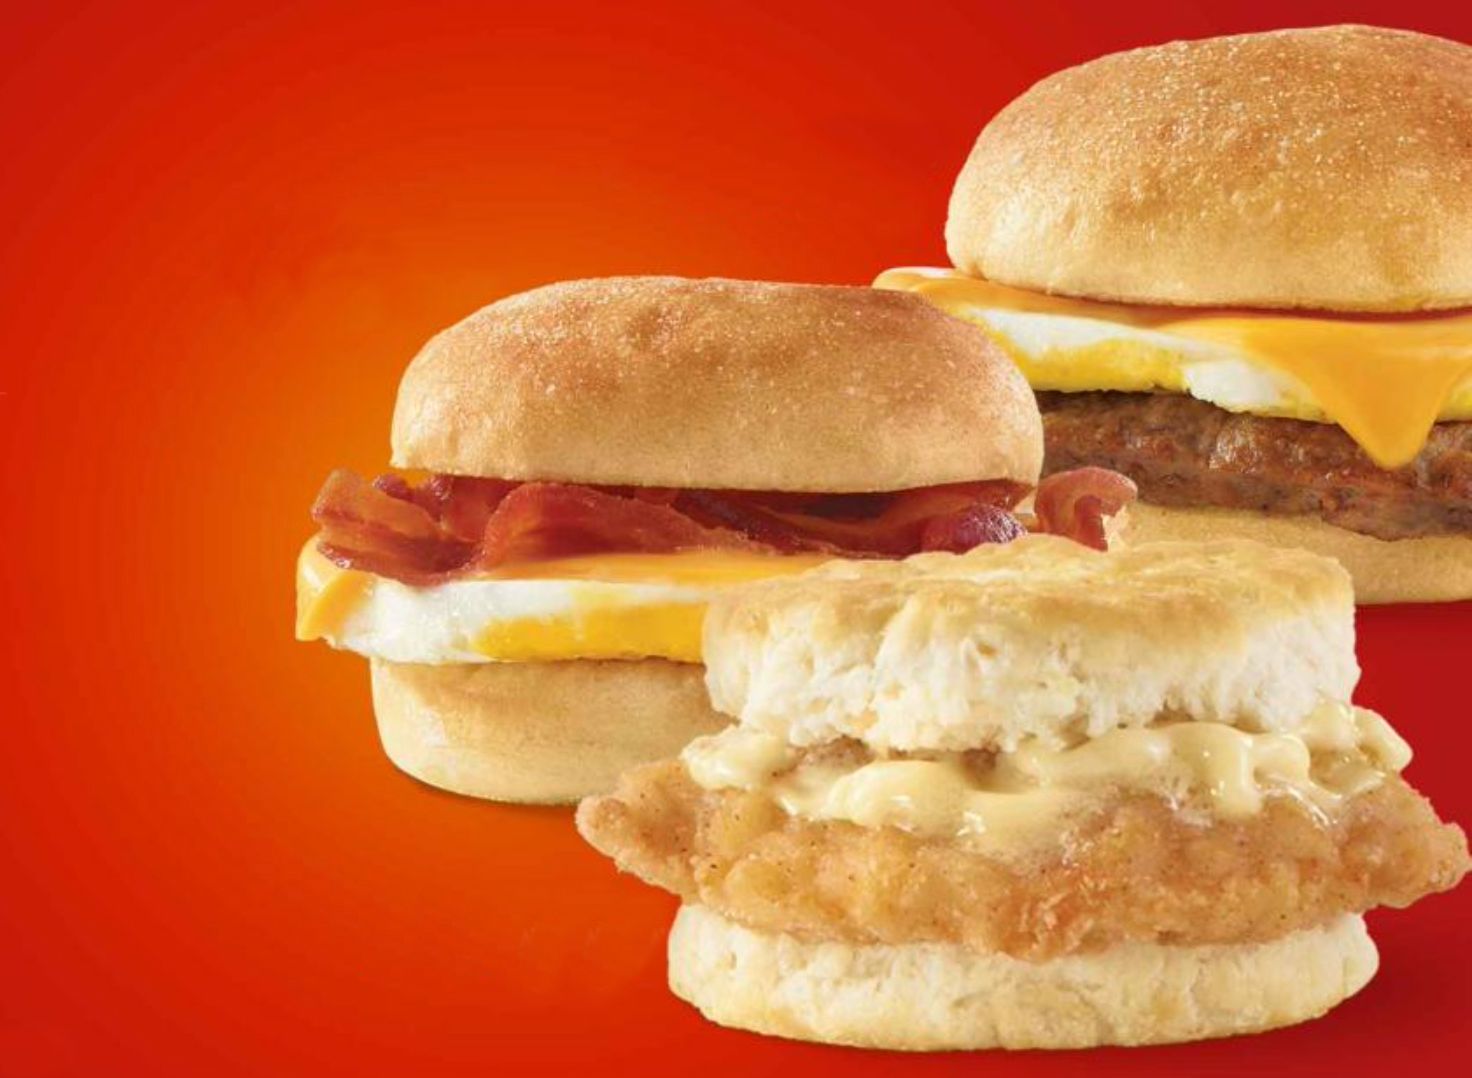 Wendy's Announces a New, Limited Time Only 2 for $4 Breakfast Sandwich Deal